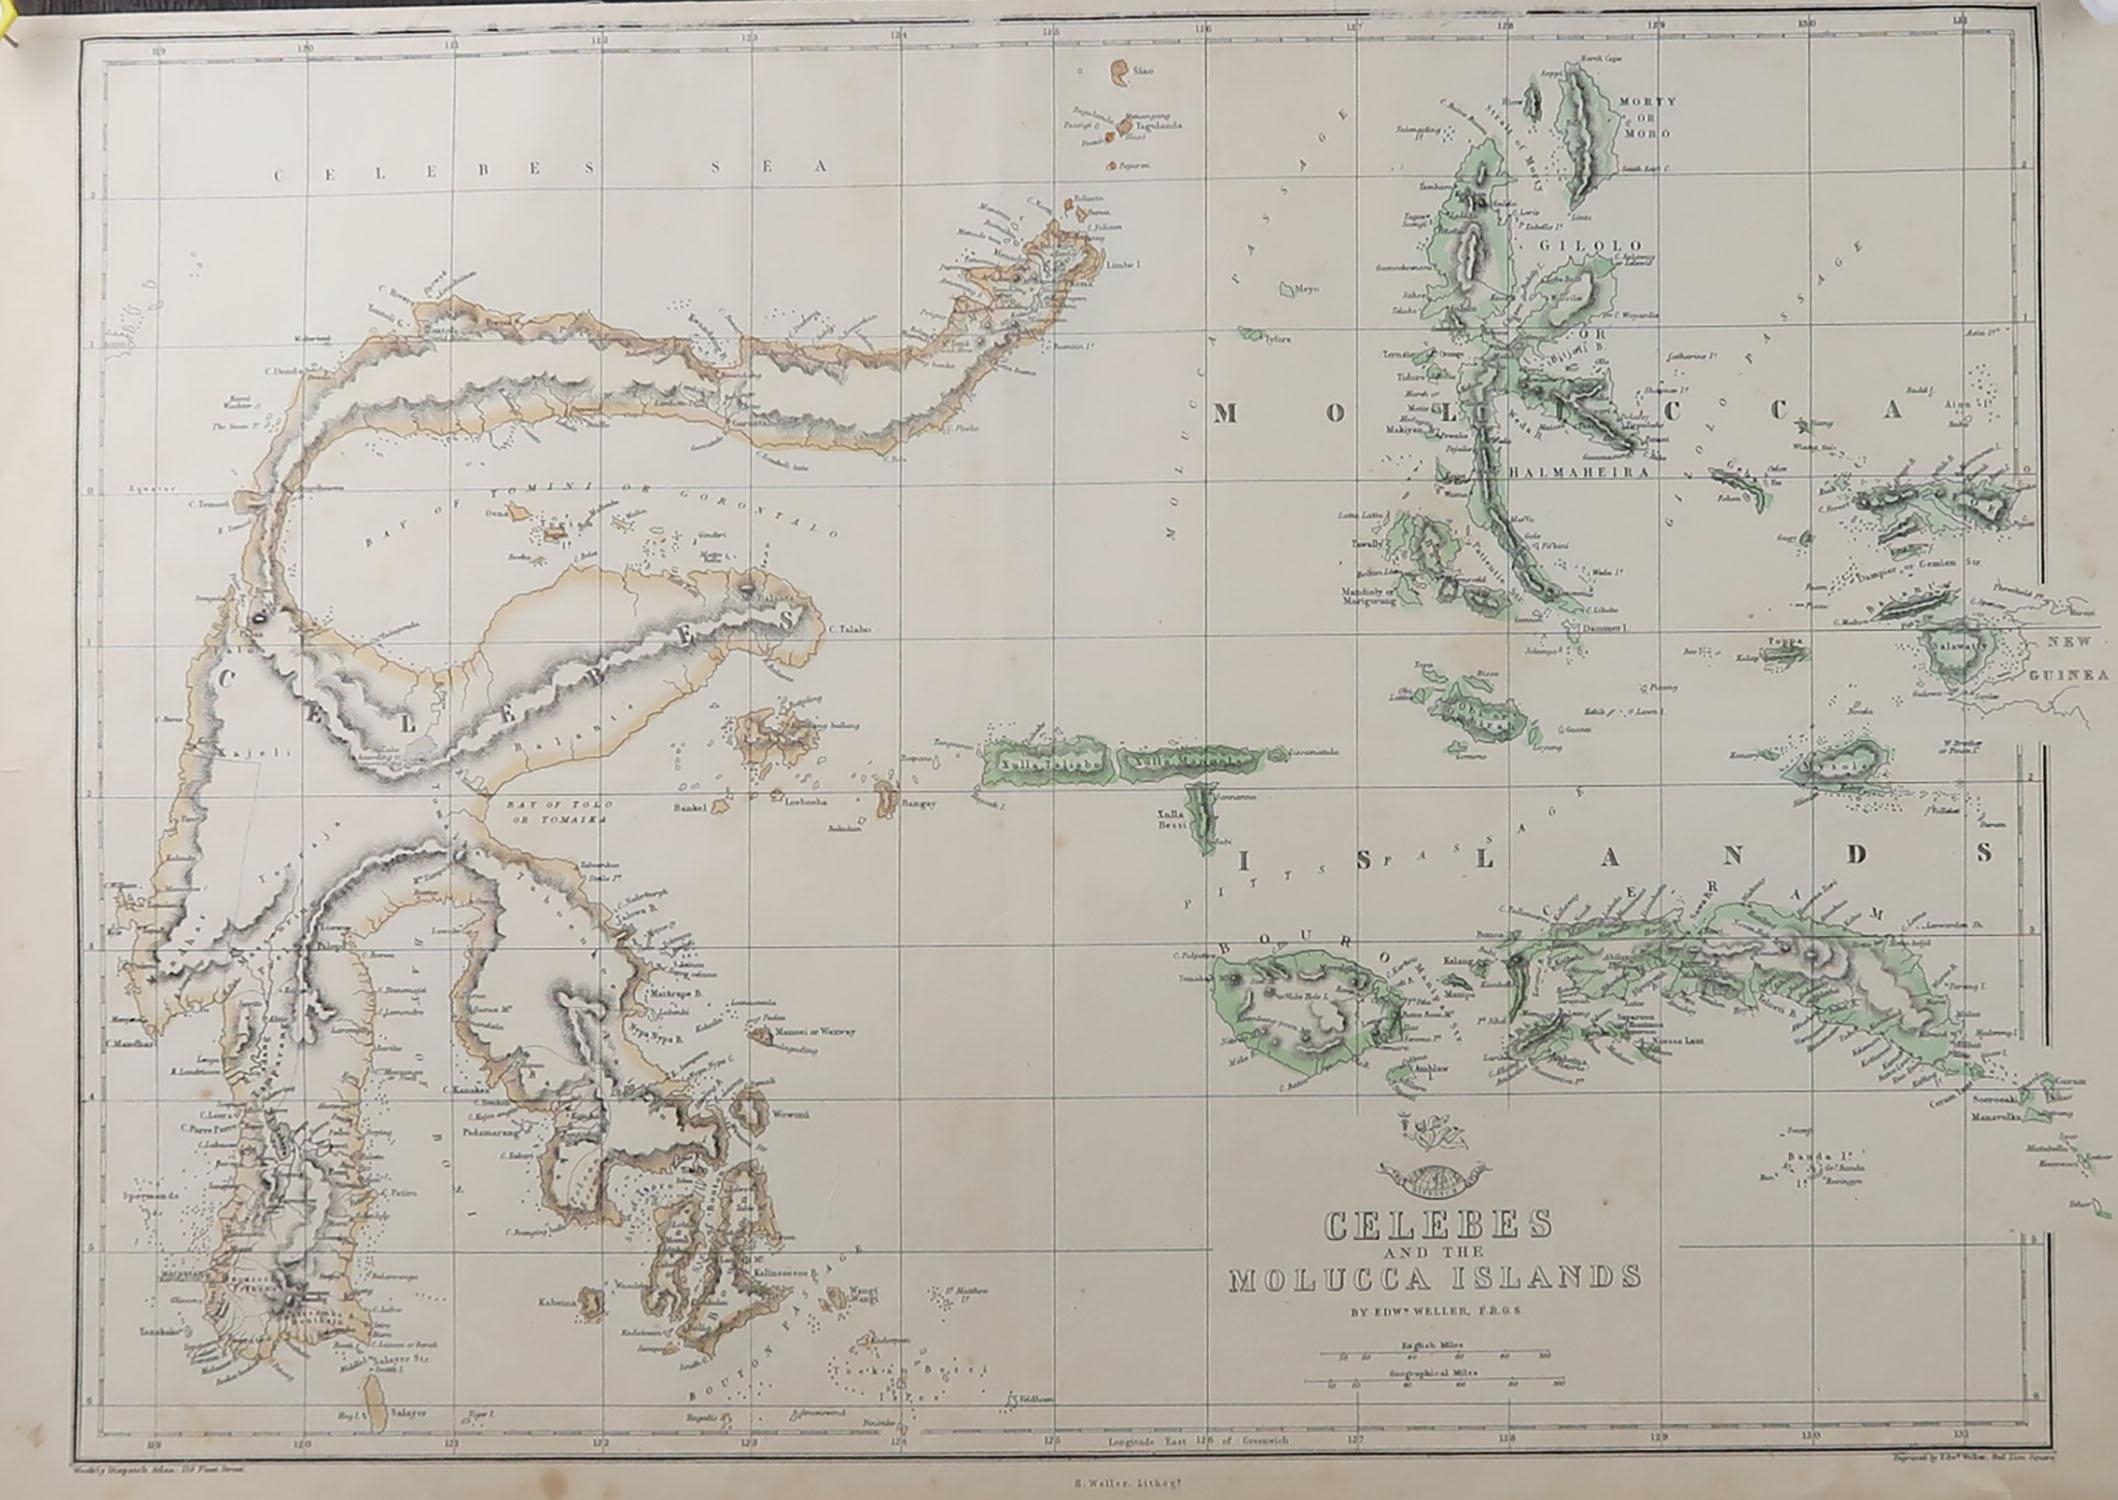 Great map of Indonesia

Drawn and engraved by Edward Weller

Original color 

Published in The Weekly Dispatch Atlas, 1861

Repairs to minor edge tears and some abrasions to top edge.

Some creases.

Unframed.








 